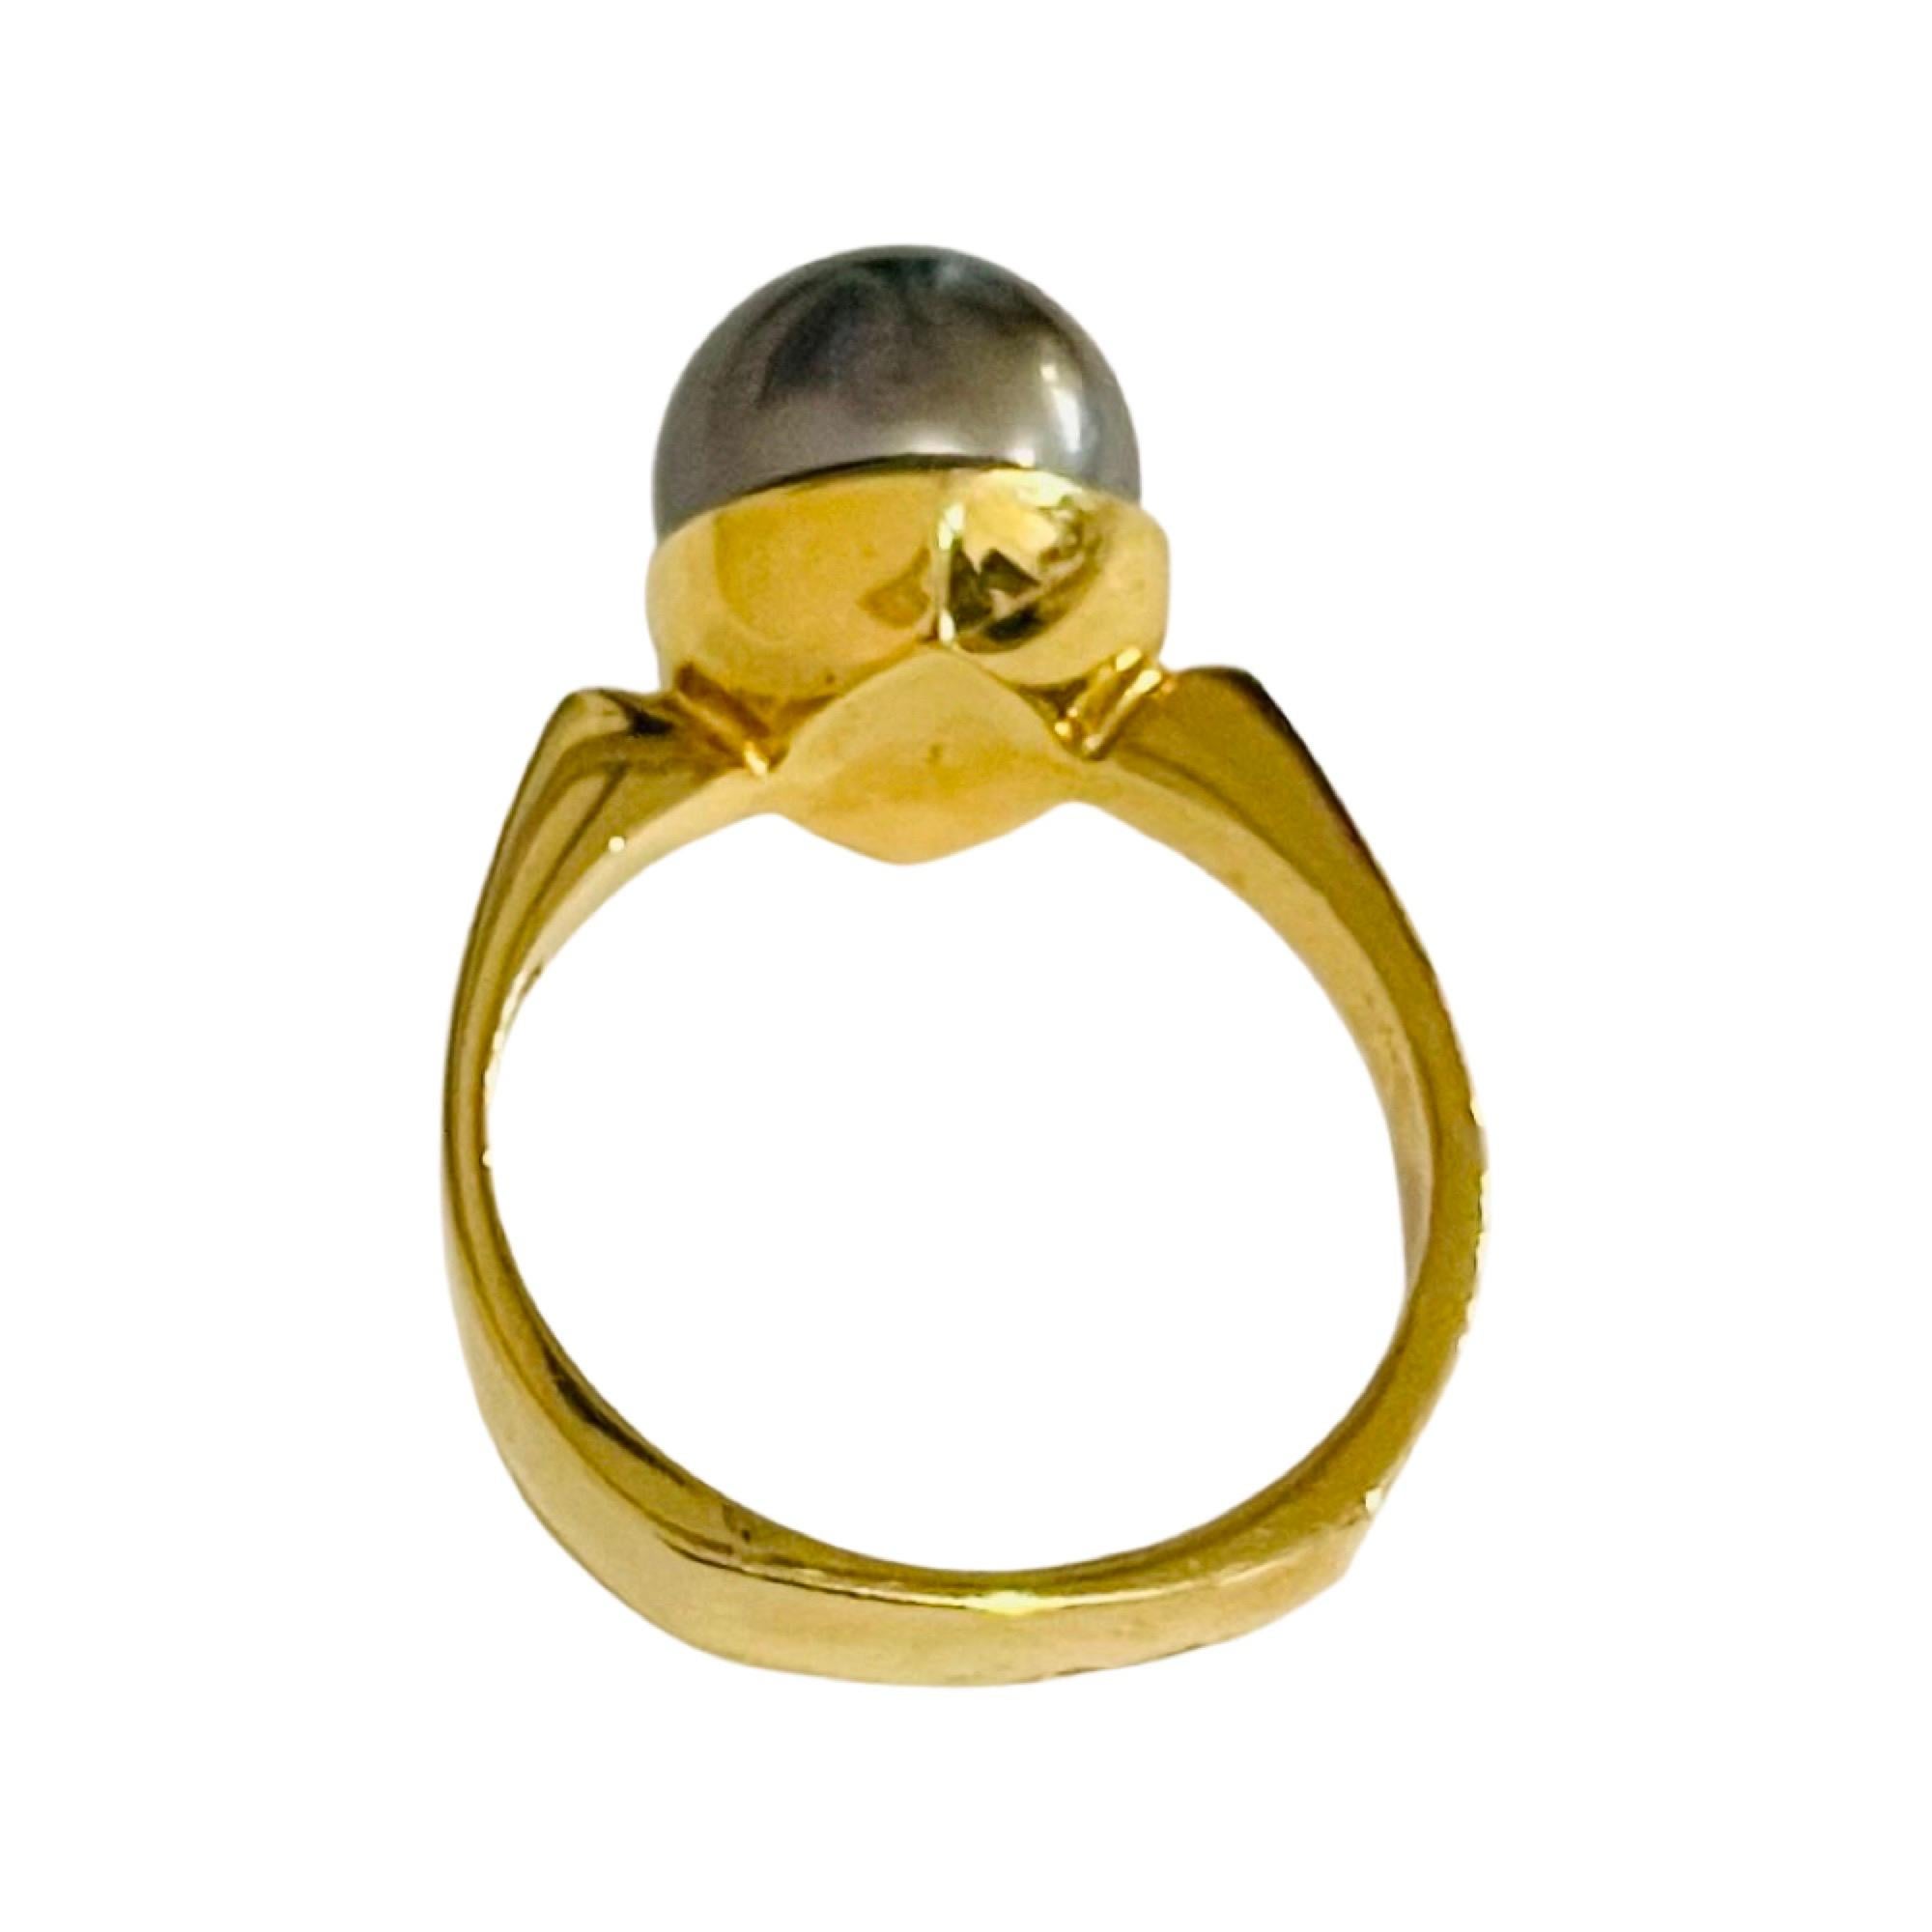 South Sea Pearl 18KY Gold Natural Color Cultured Black Tahitian Pearl Ring. The Pearl is 10.5 mm.  It is round with high luster, rose overtone and very slight blemishes. The shank is 4.3 mm at the top and tapers to 2.5 mm at the base. It is finger